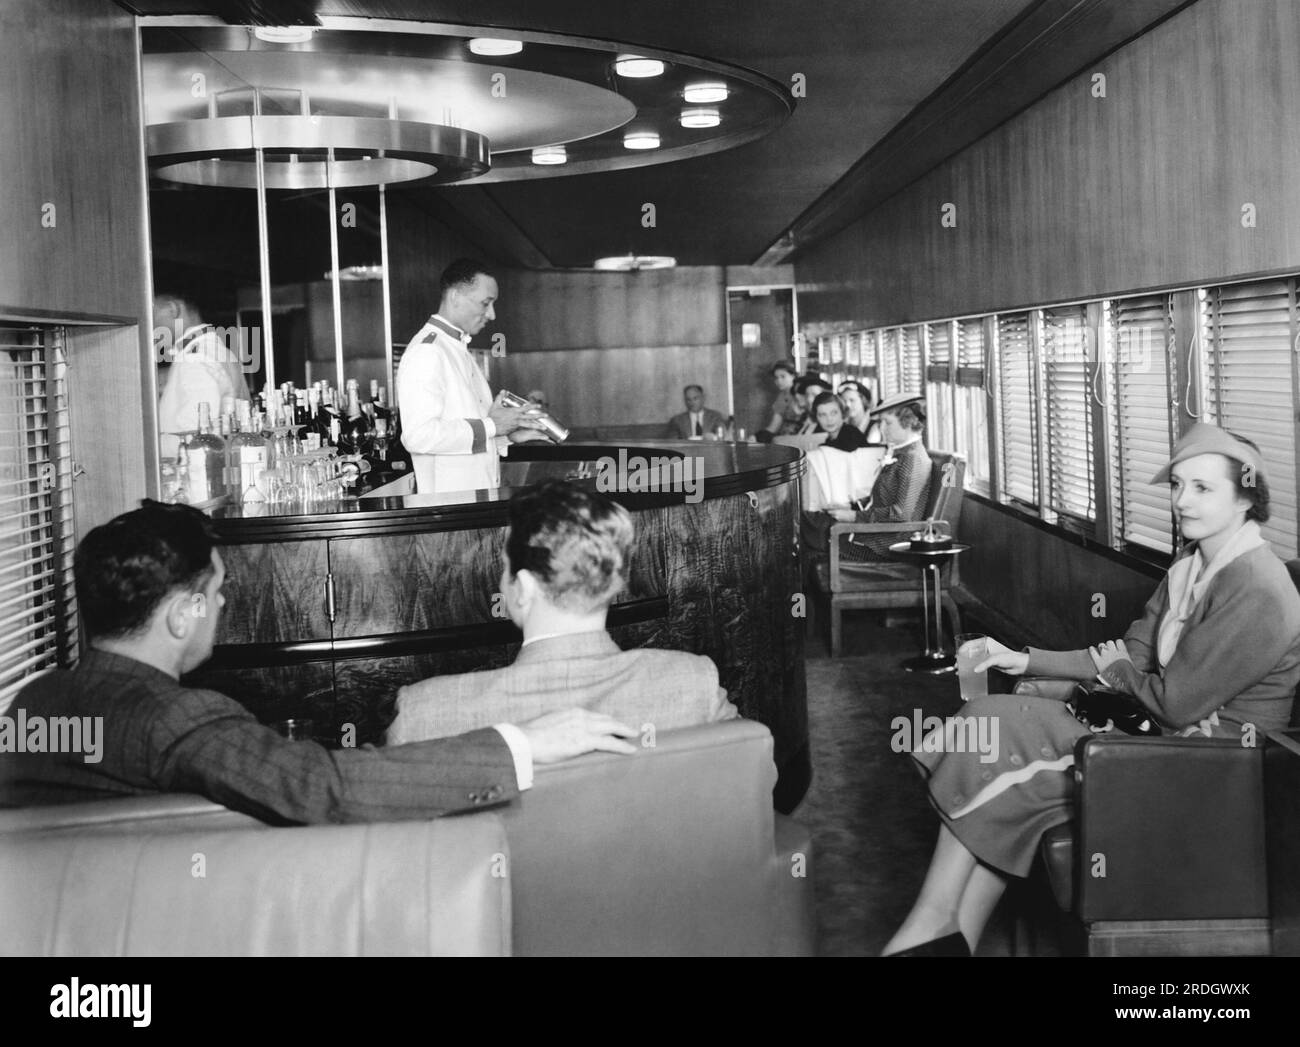 Detroit, Michigan:  1936. The interior of the lounge car on the New York Central Railroad's new streamlined Mercury train. The train was designed by noted industrial designer Henry Dreyfuss and operates between Cleveland and Detroit. Stock Photo